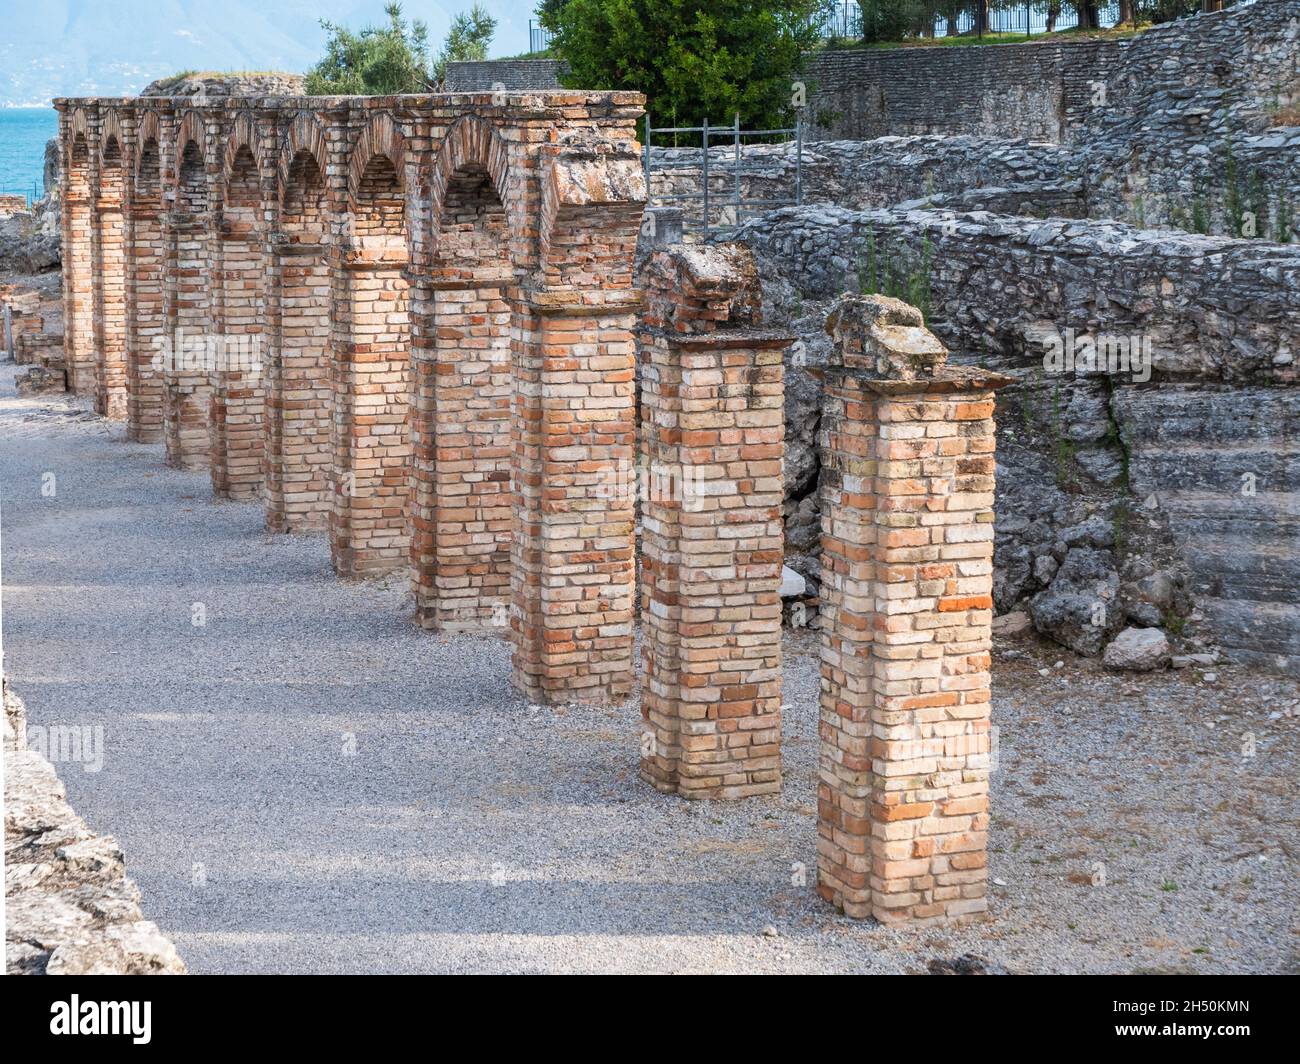 Grottoes of Catullus or Grotte die Catullo Cryptoporticus or Cryptoportico on Sirmione Peninsula at Lake Garda, Italy Stock Photo